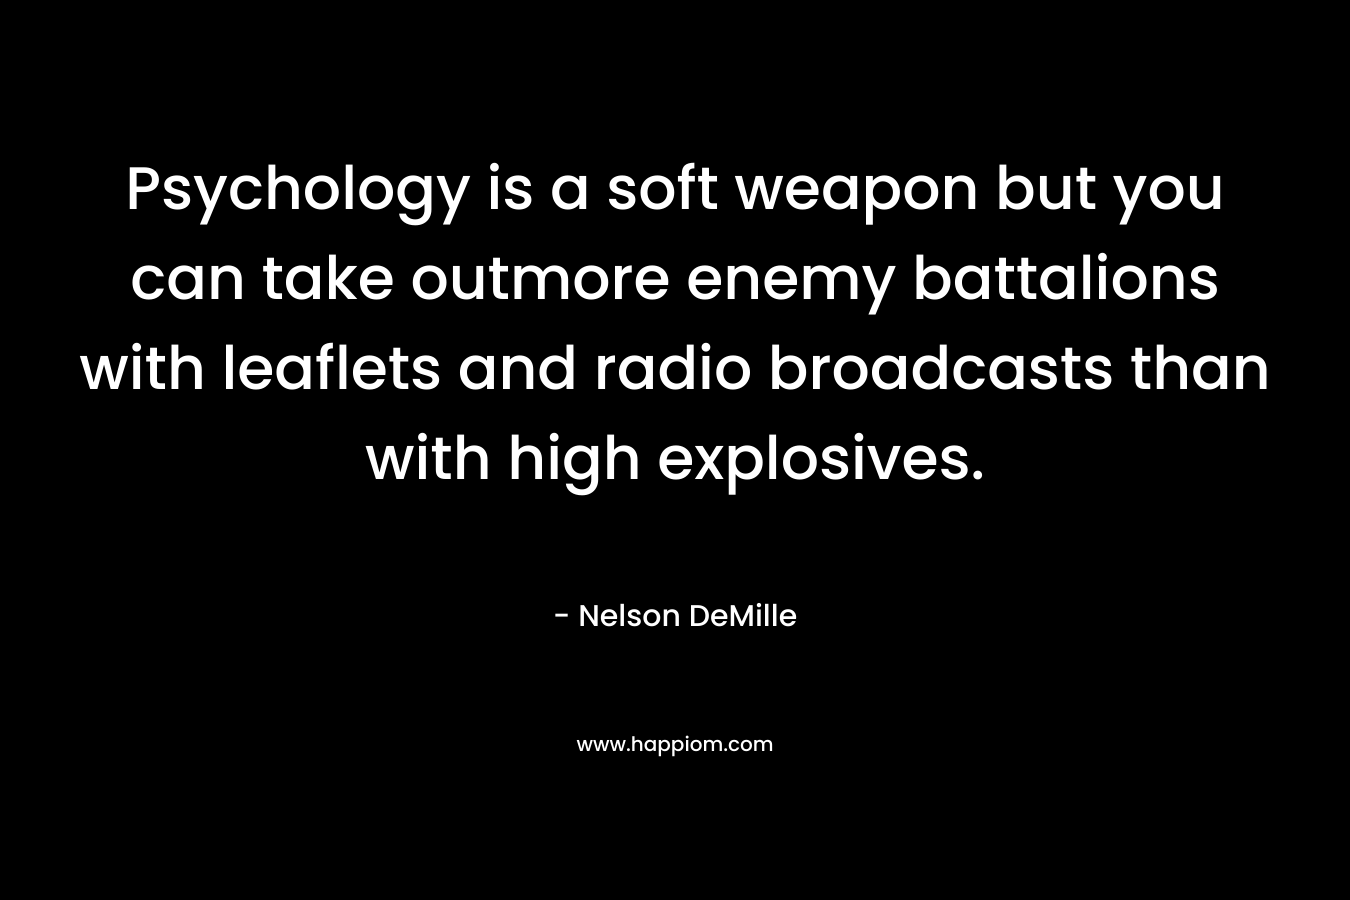 Psychology is a soft weapon but you can take outmore enemy battalions with leaflets and radio broadcasts than with high explosives.